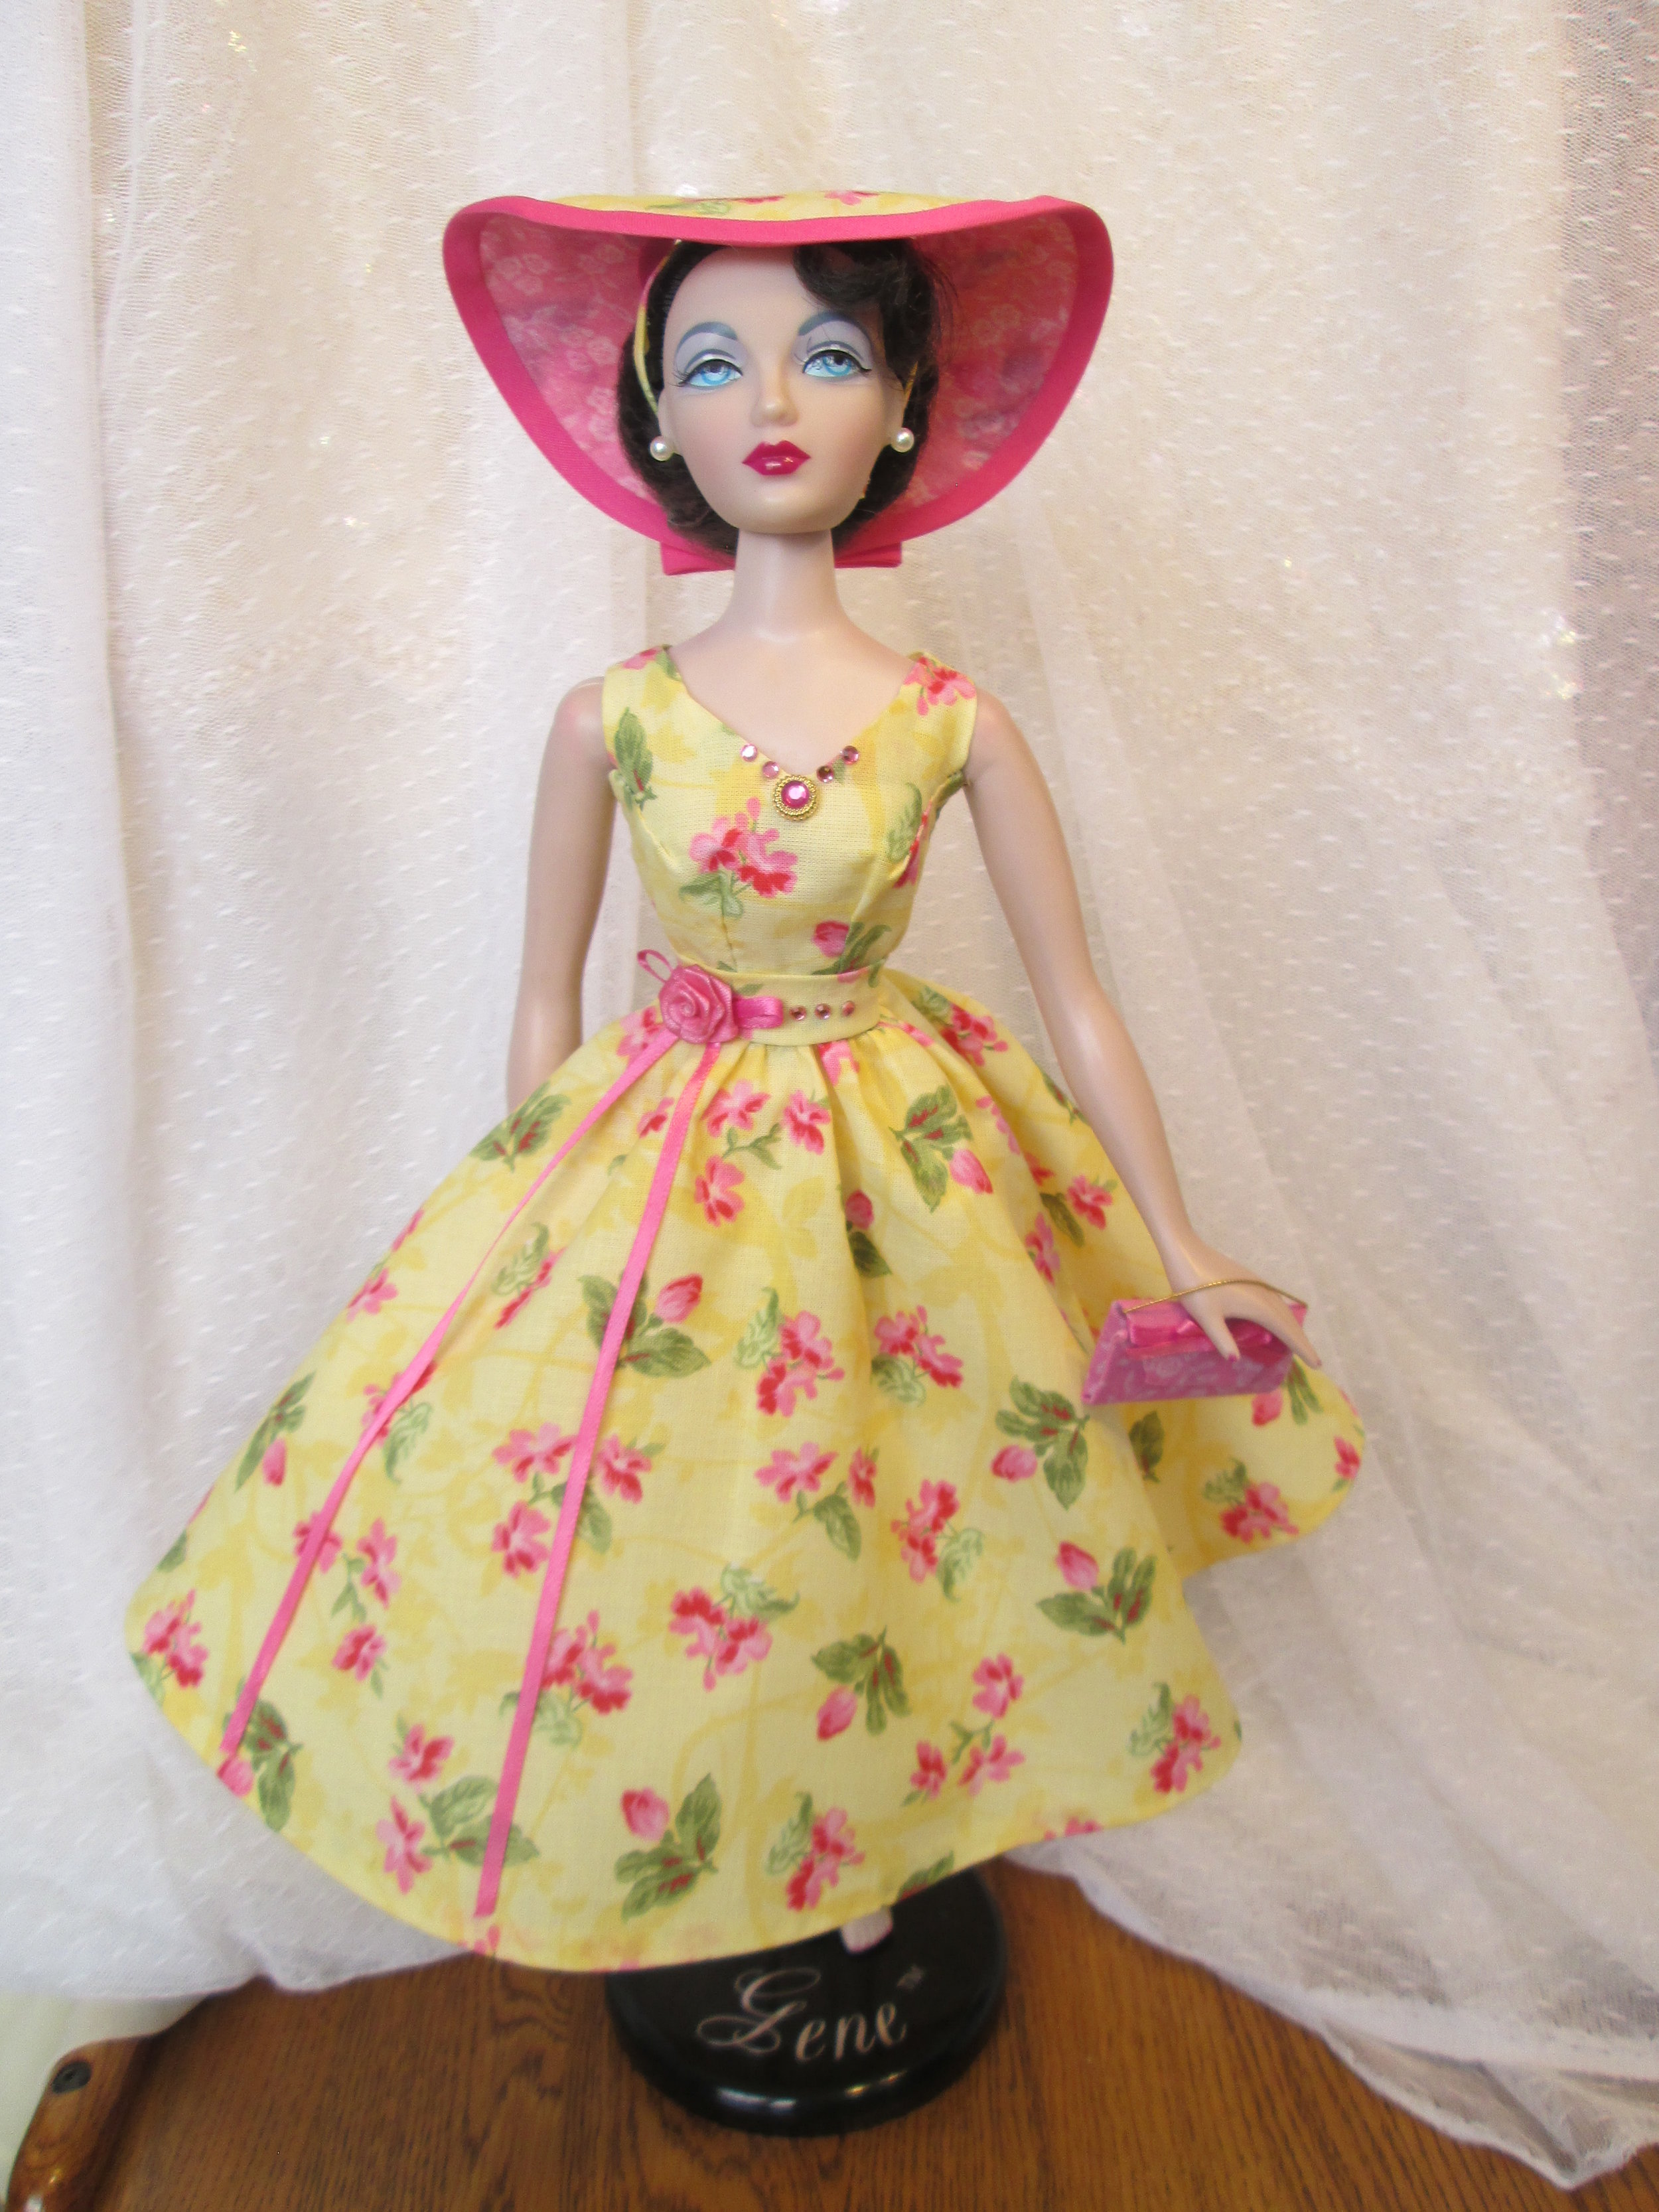 Handmade Floral Gene Doll Dresses and Accessories by JMB Designs